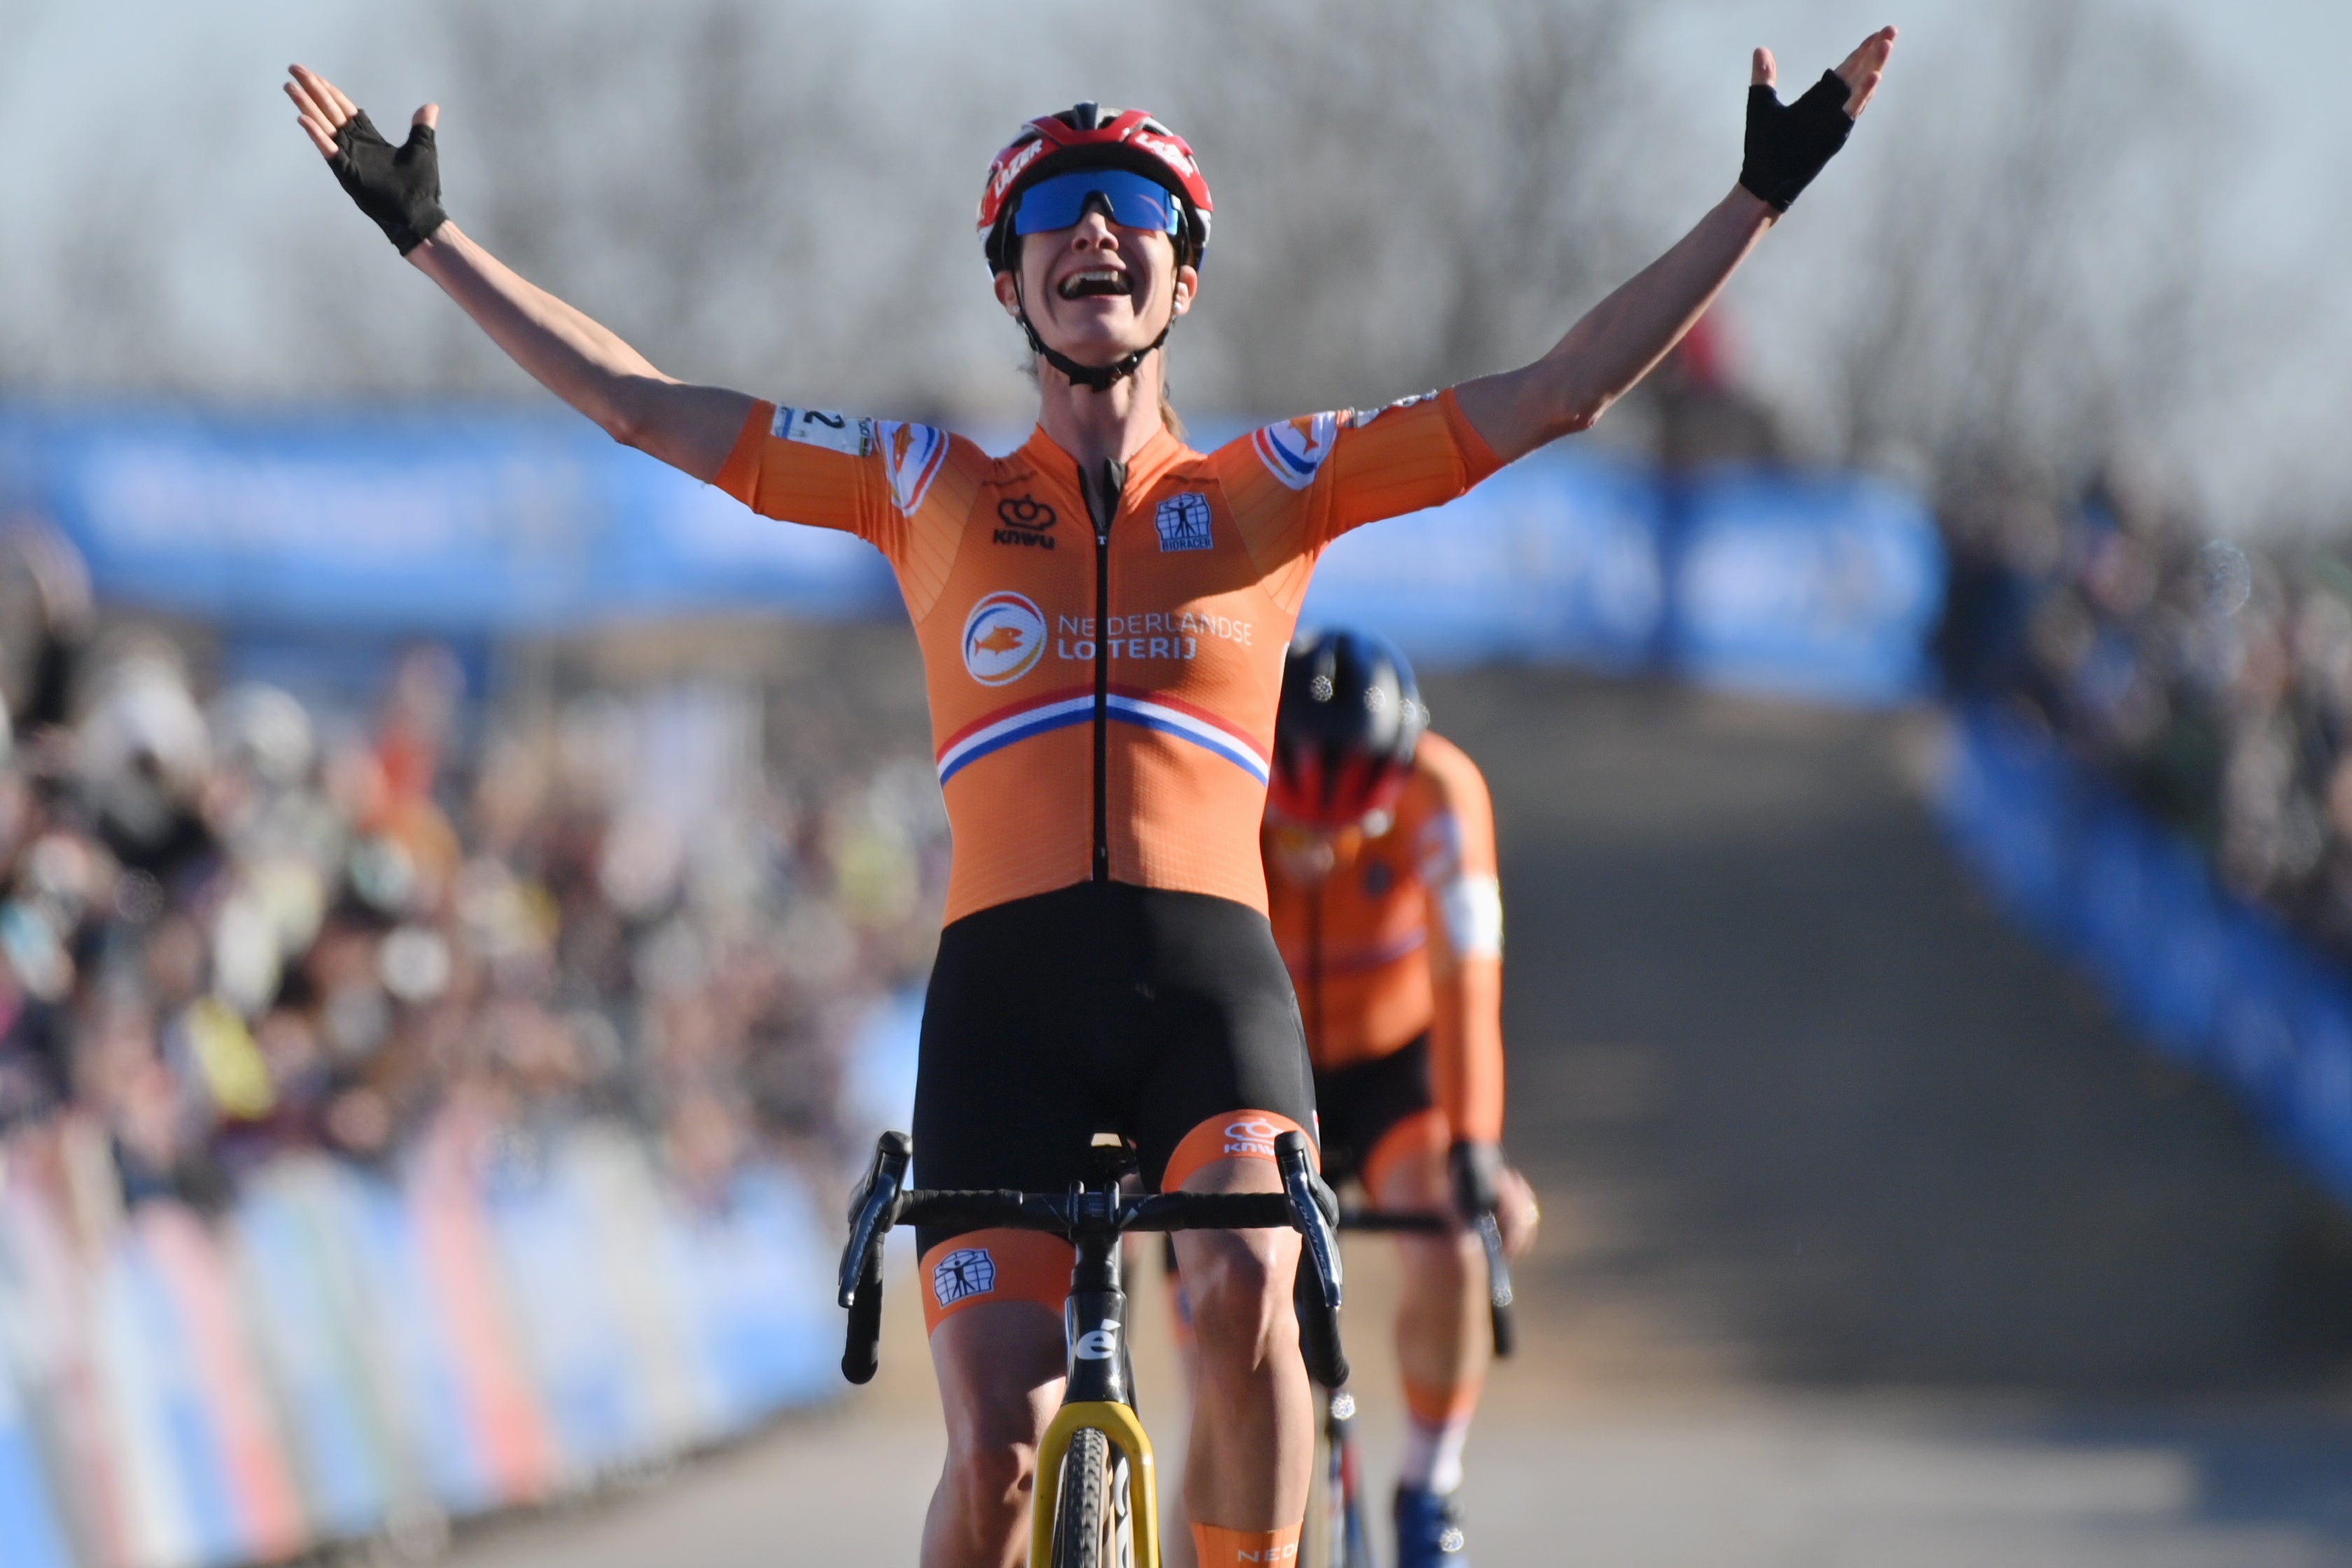 The remarkable Marianne Vos will chase a first Paris-Roubaix win